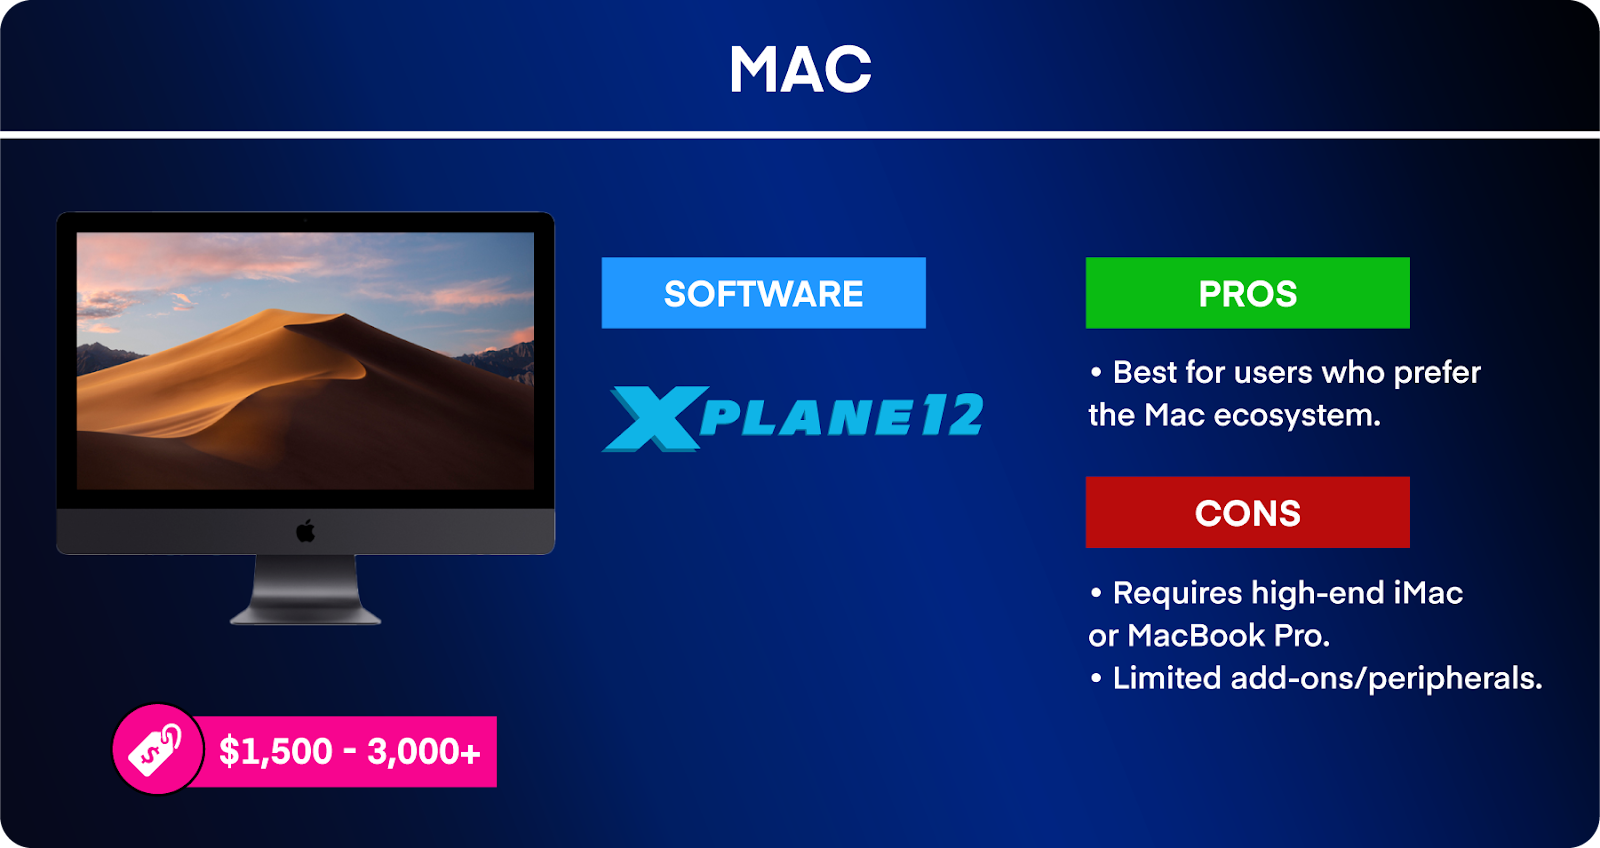 Mac infographic, listing sim software, price range, pros, and cons.